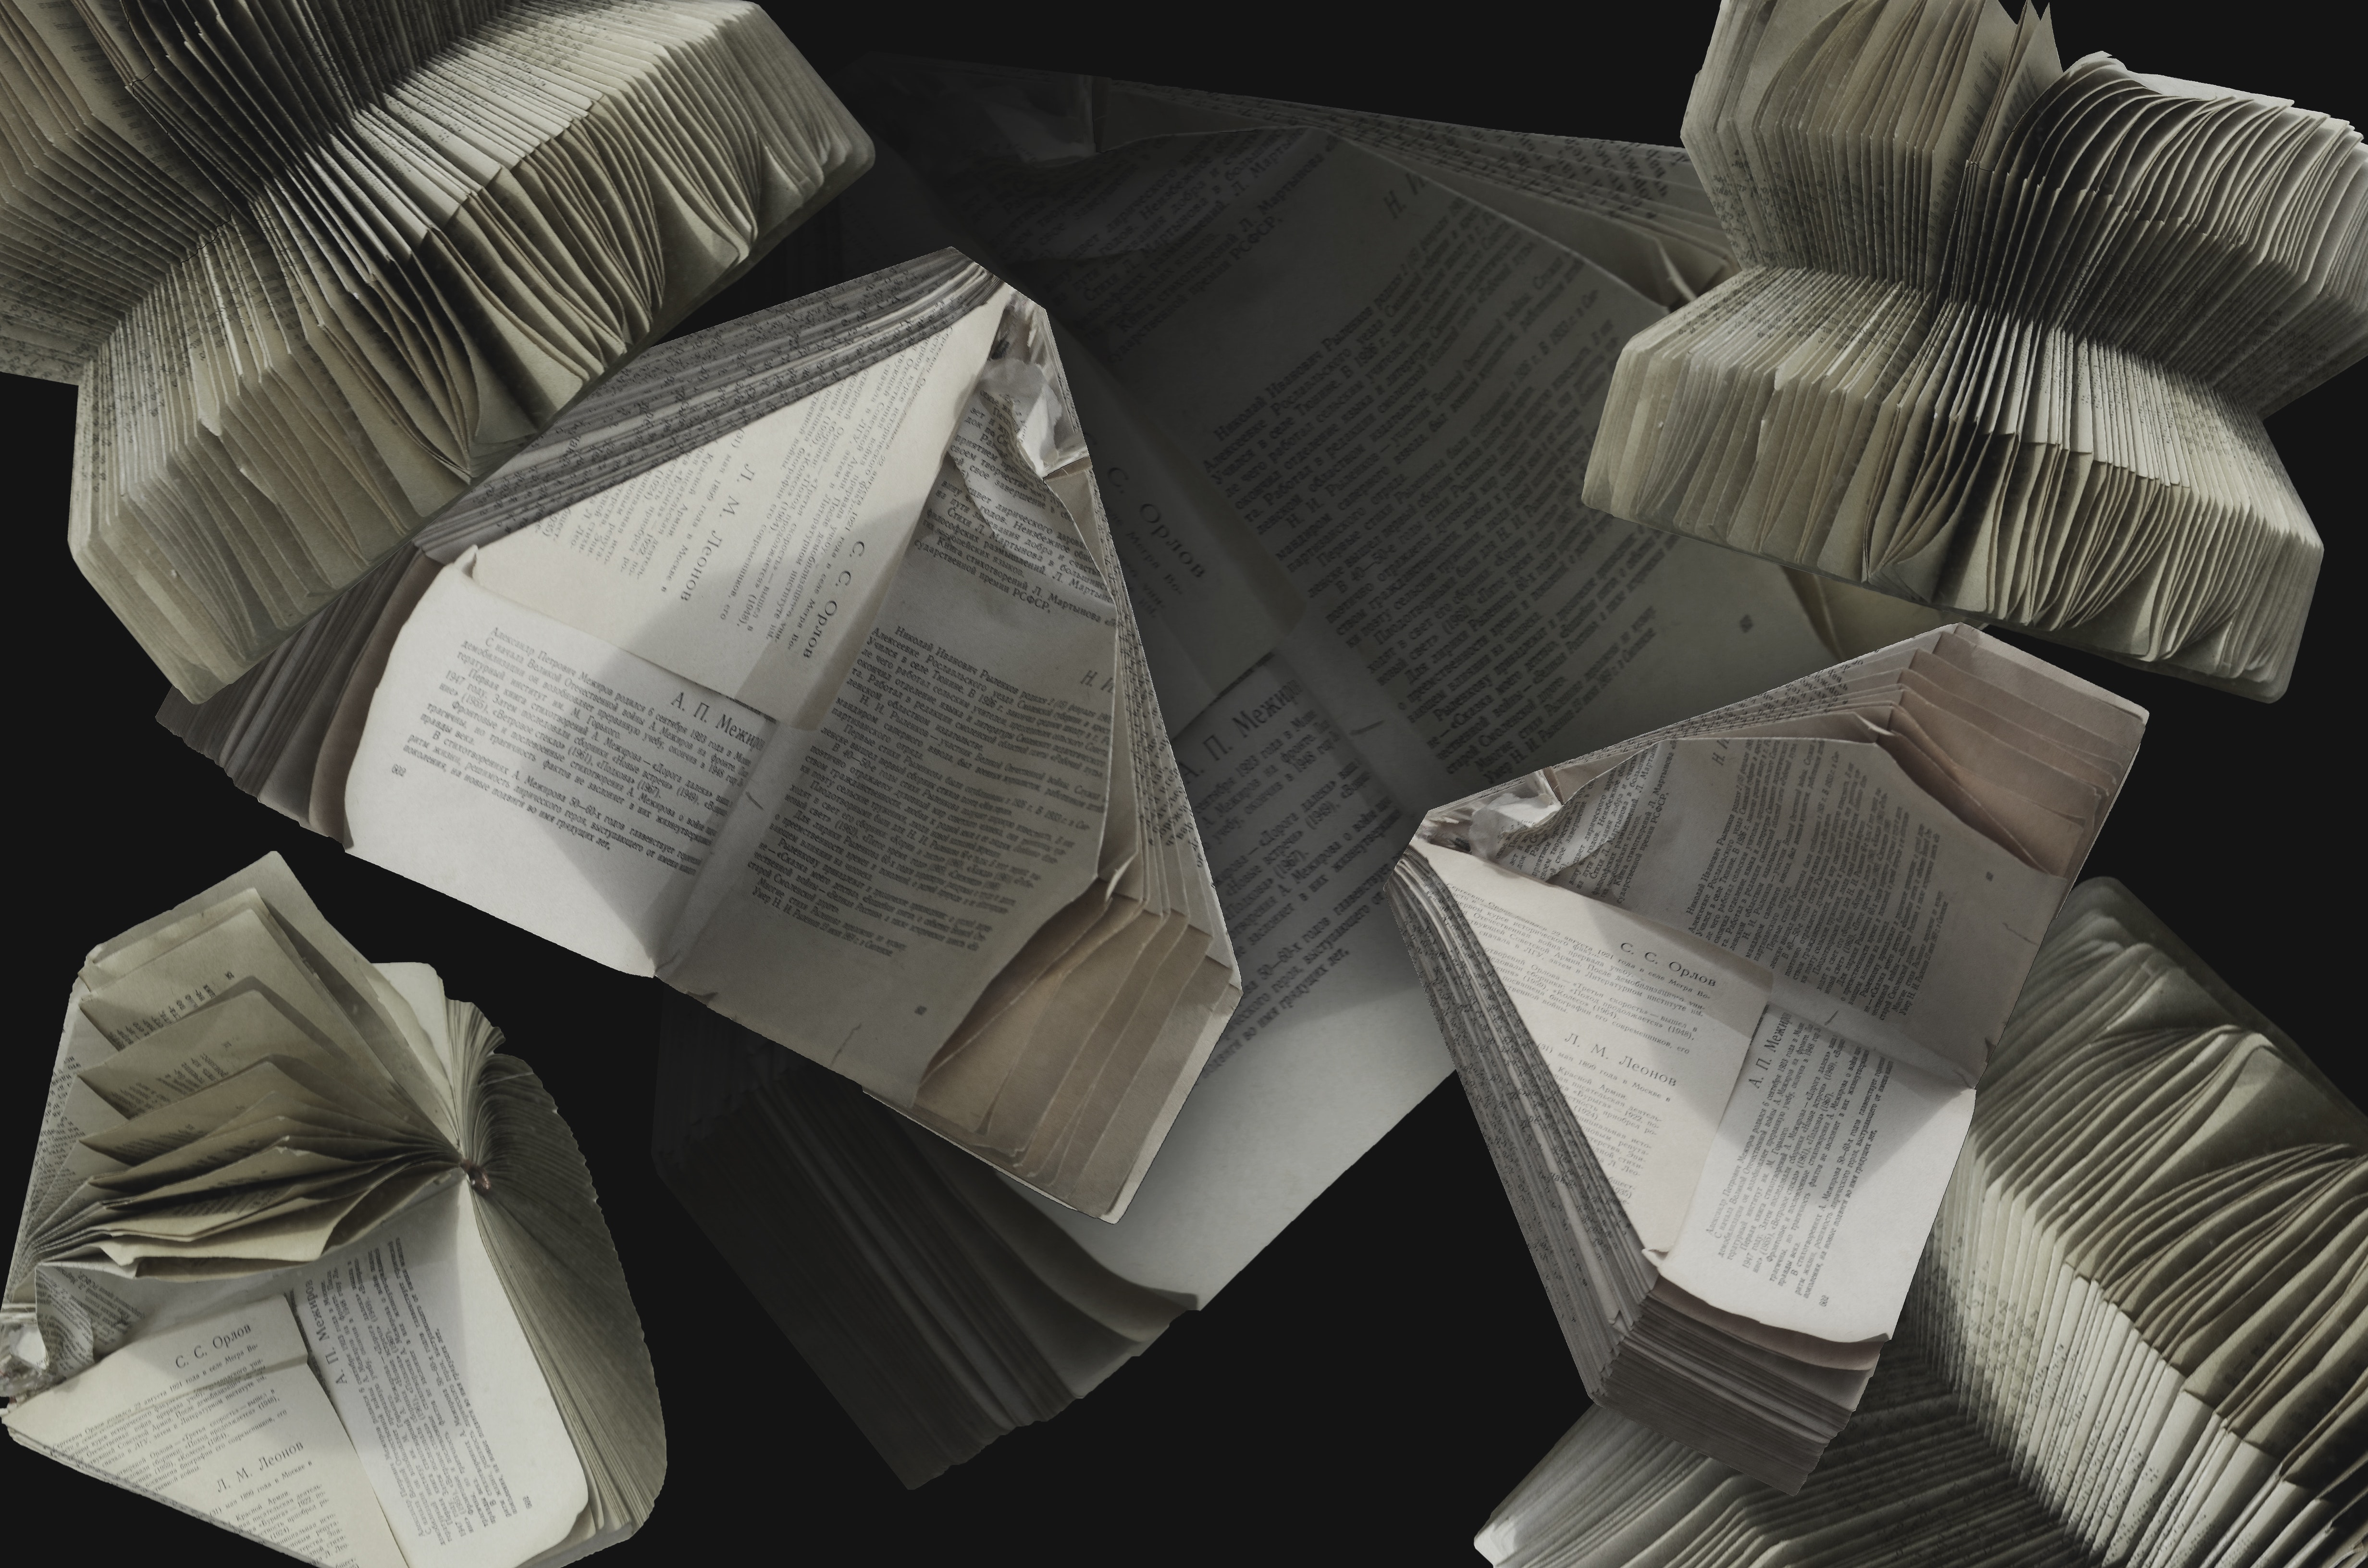 books-with-folded-pages-2377295